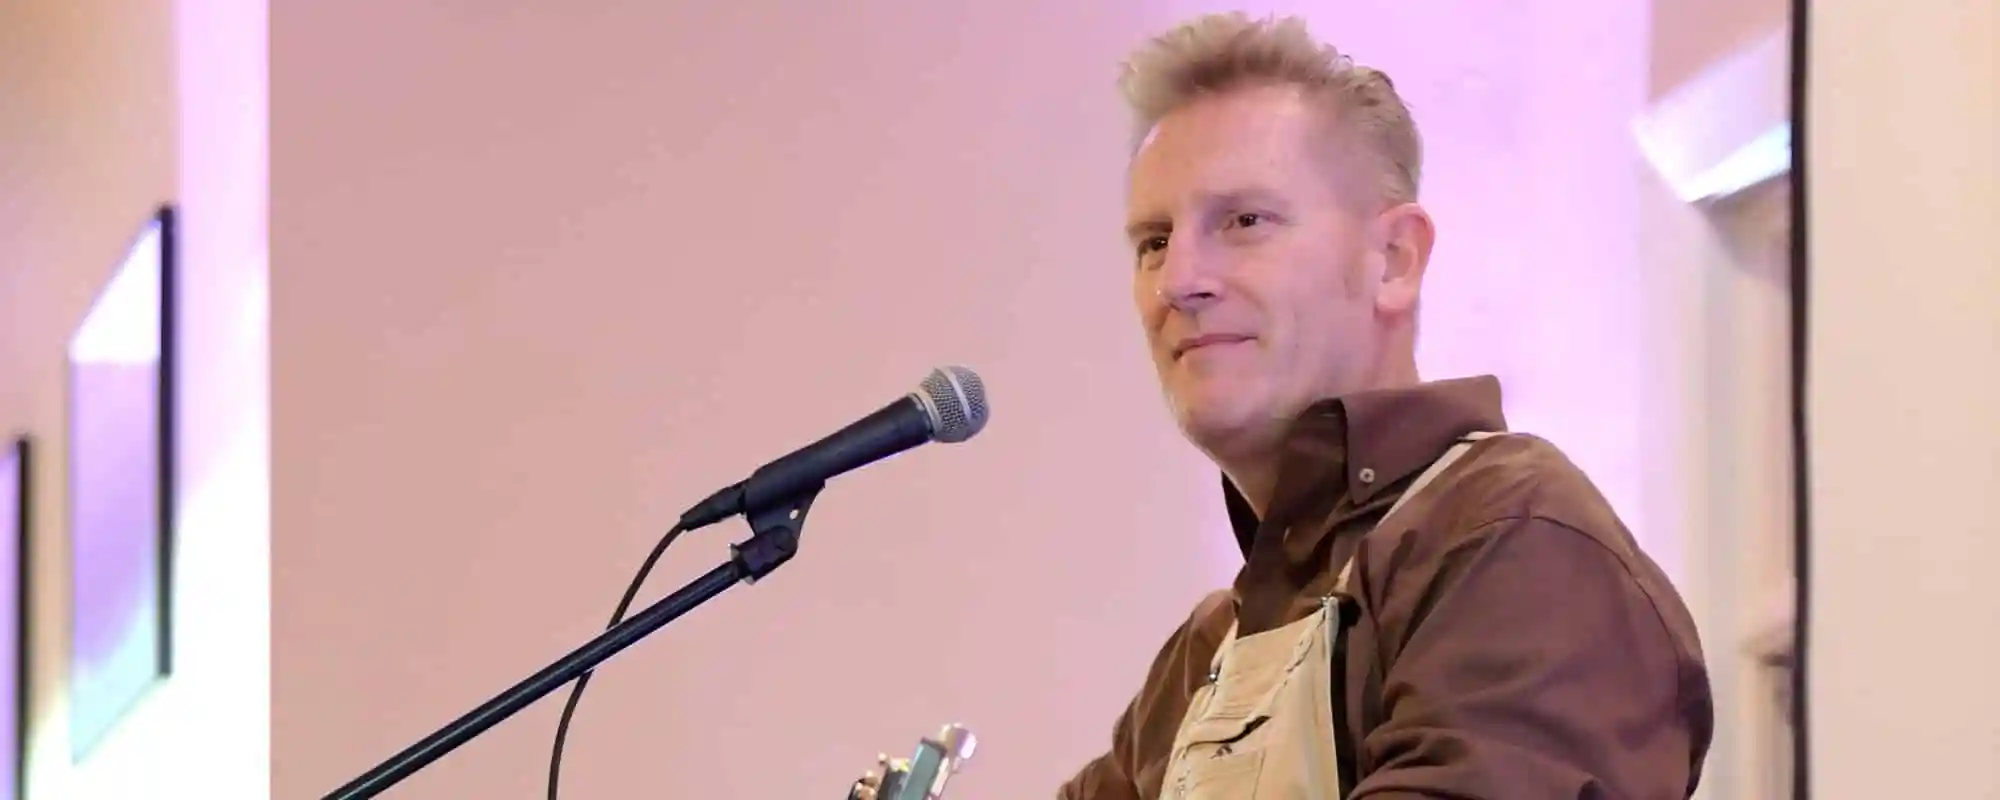 3 Songs You Didn’t Know Rory Feek Wrote for Other Artists